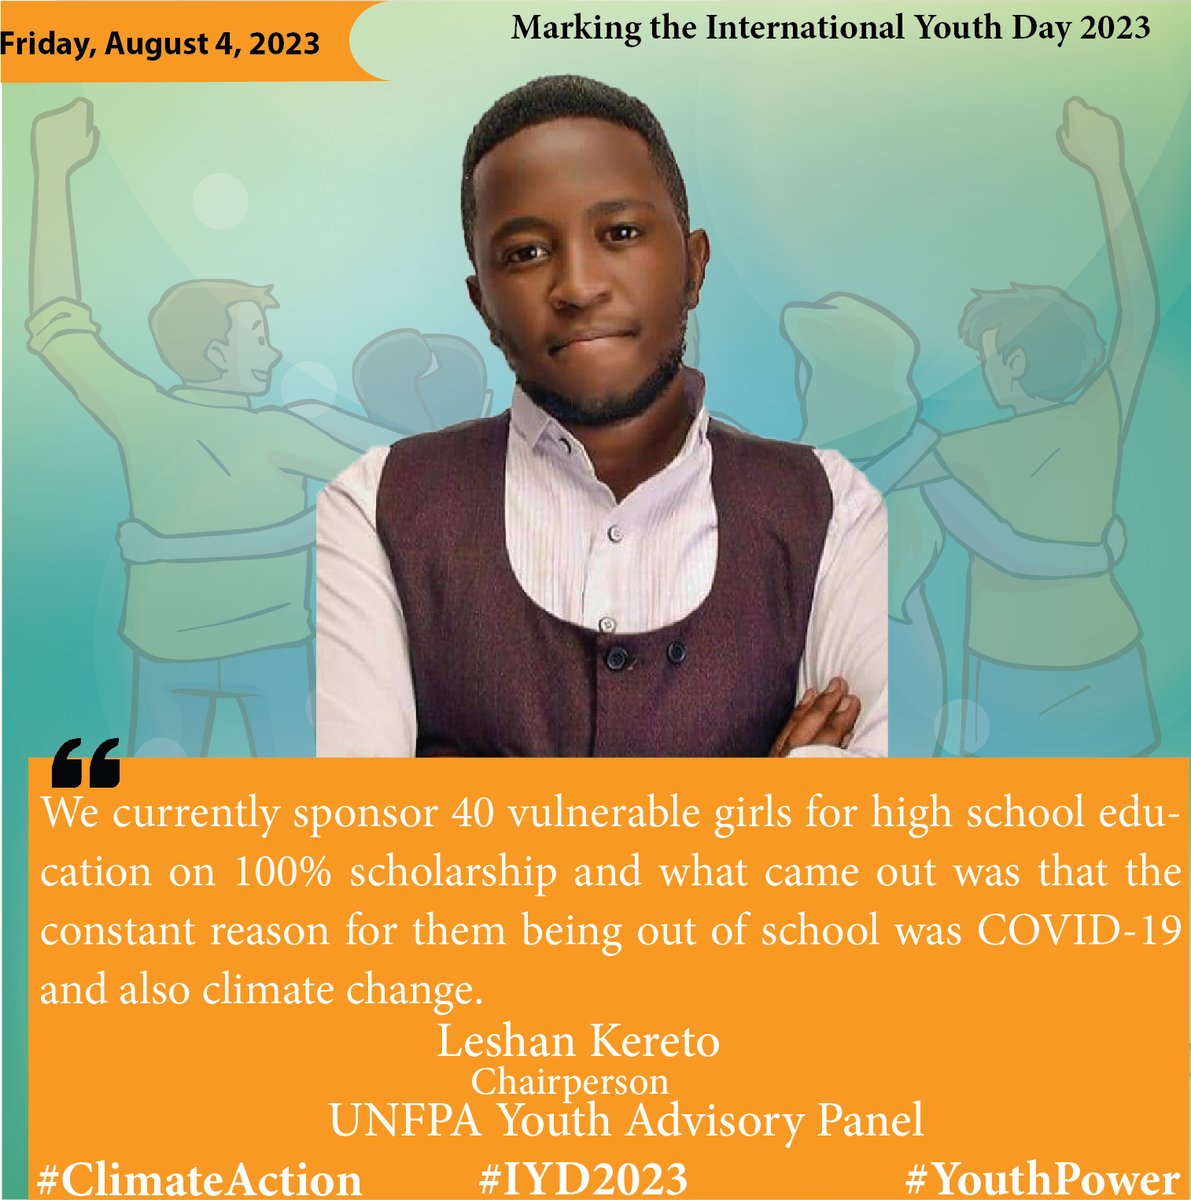 We currently sponsor 40 vulnerable girls for high school education on 100% scholarship and what came out was that the constant reason for them being out of school was COVID-19 and also climate change. -@OleLeshan #ClimateAction #IYD2023 @UNFPAKen